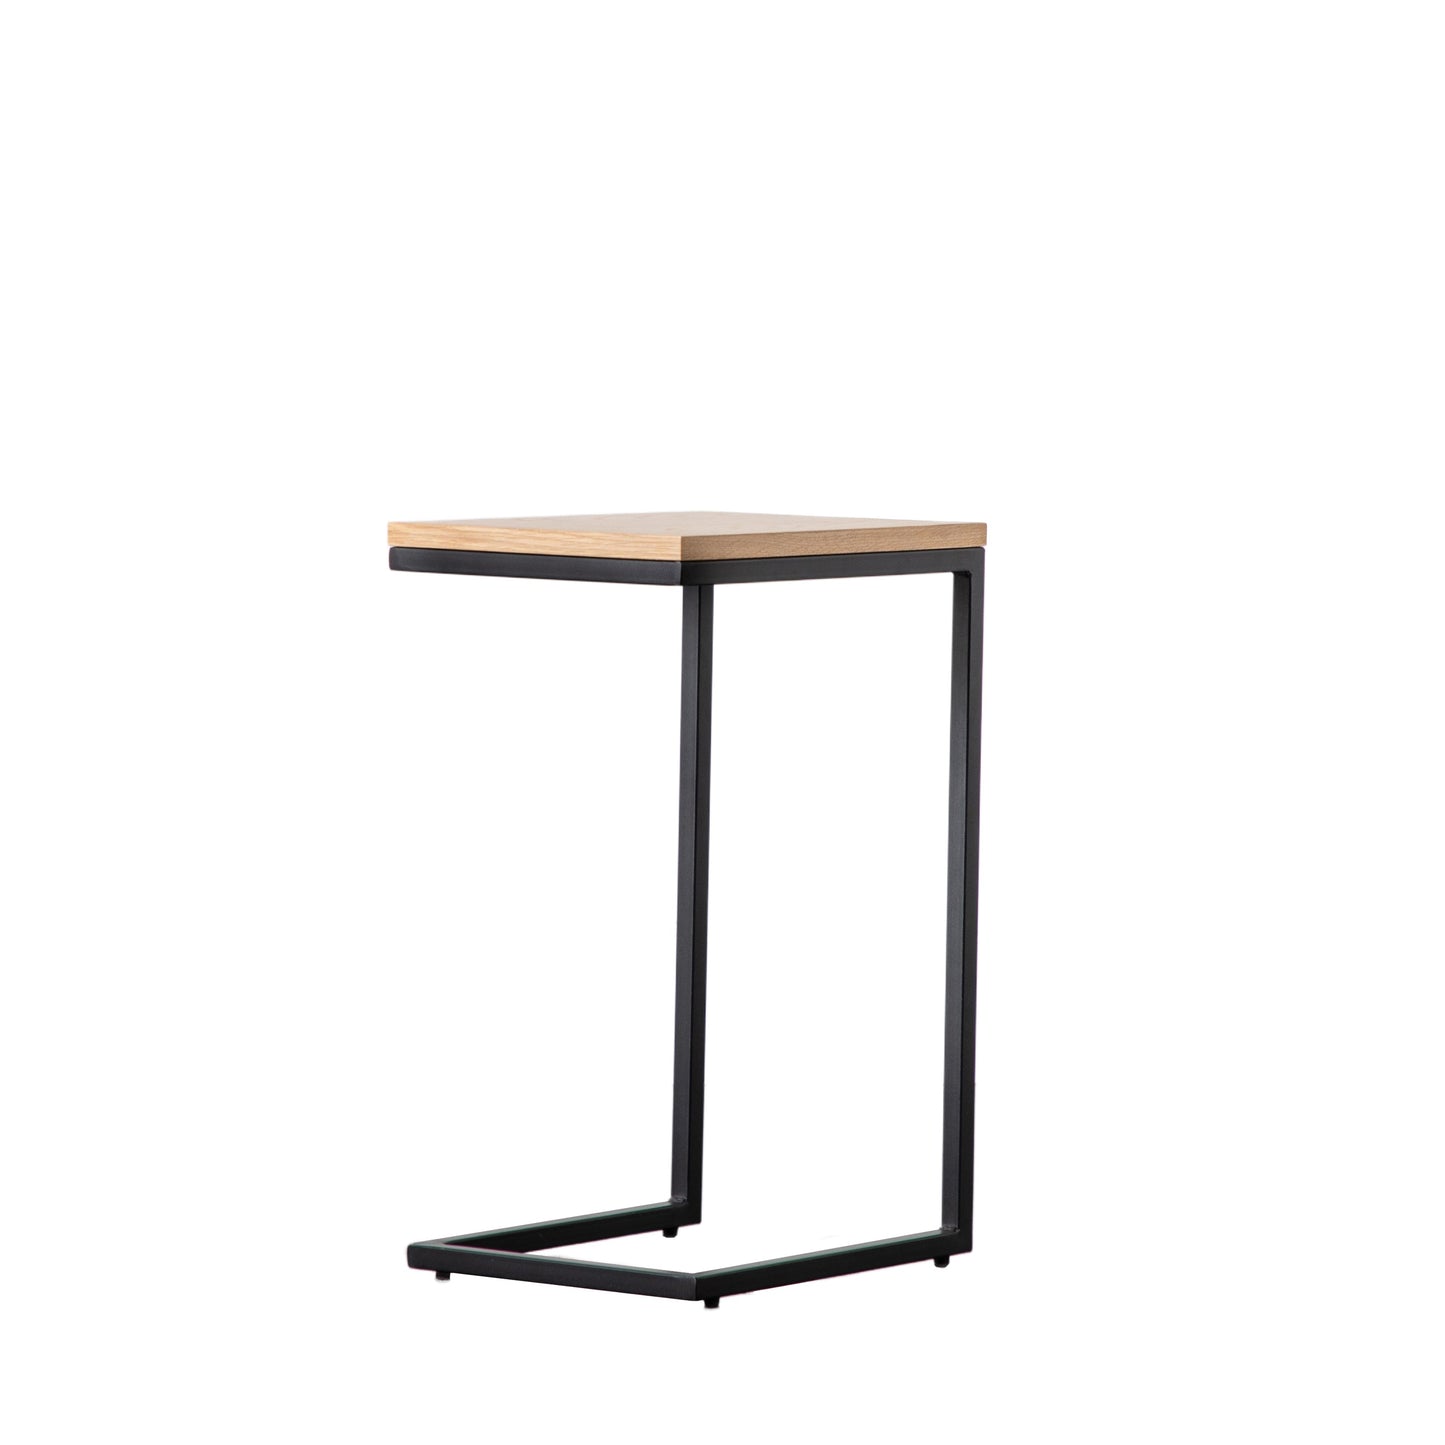 Henley Supper C Table 300x400x600mm